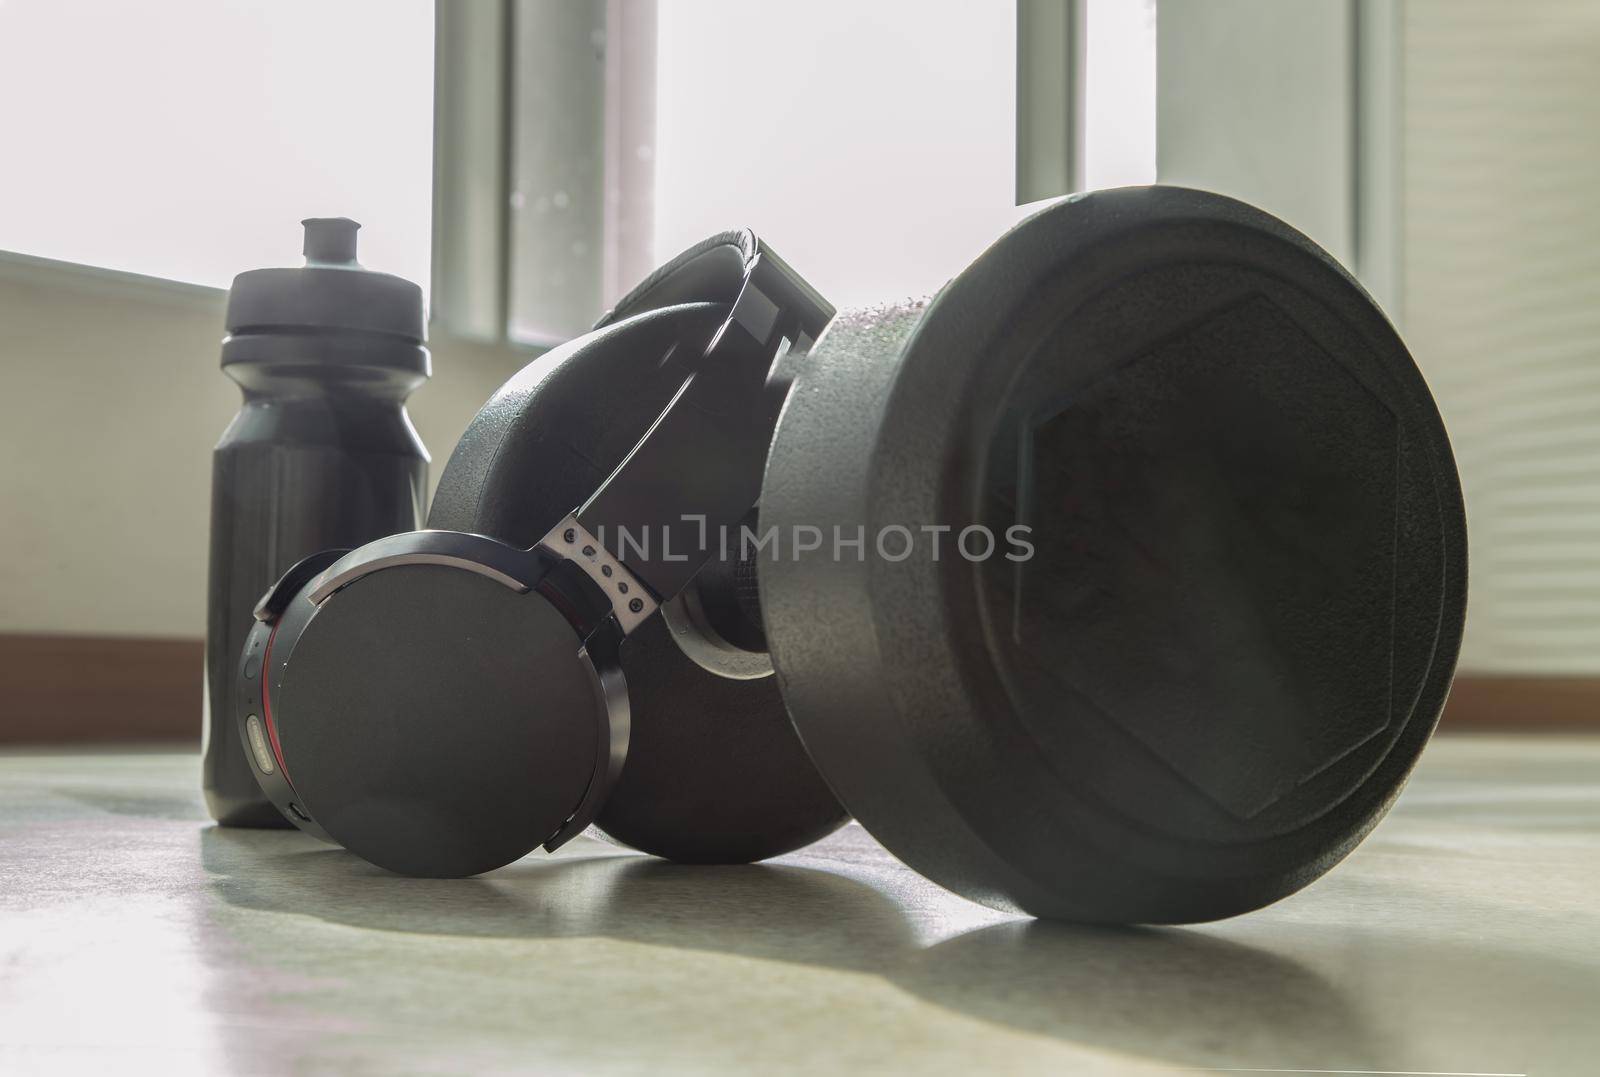 Headphones, Dumbbell and Water bottle for Listening to music while exercising.  by tosirikul